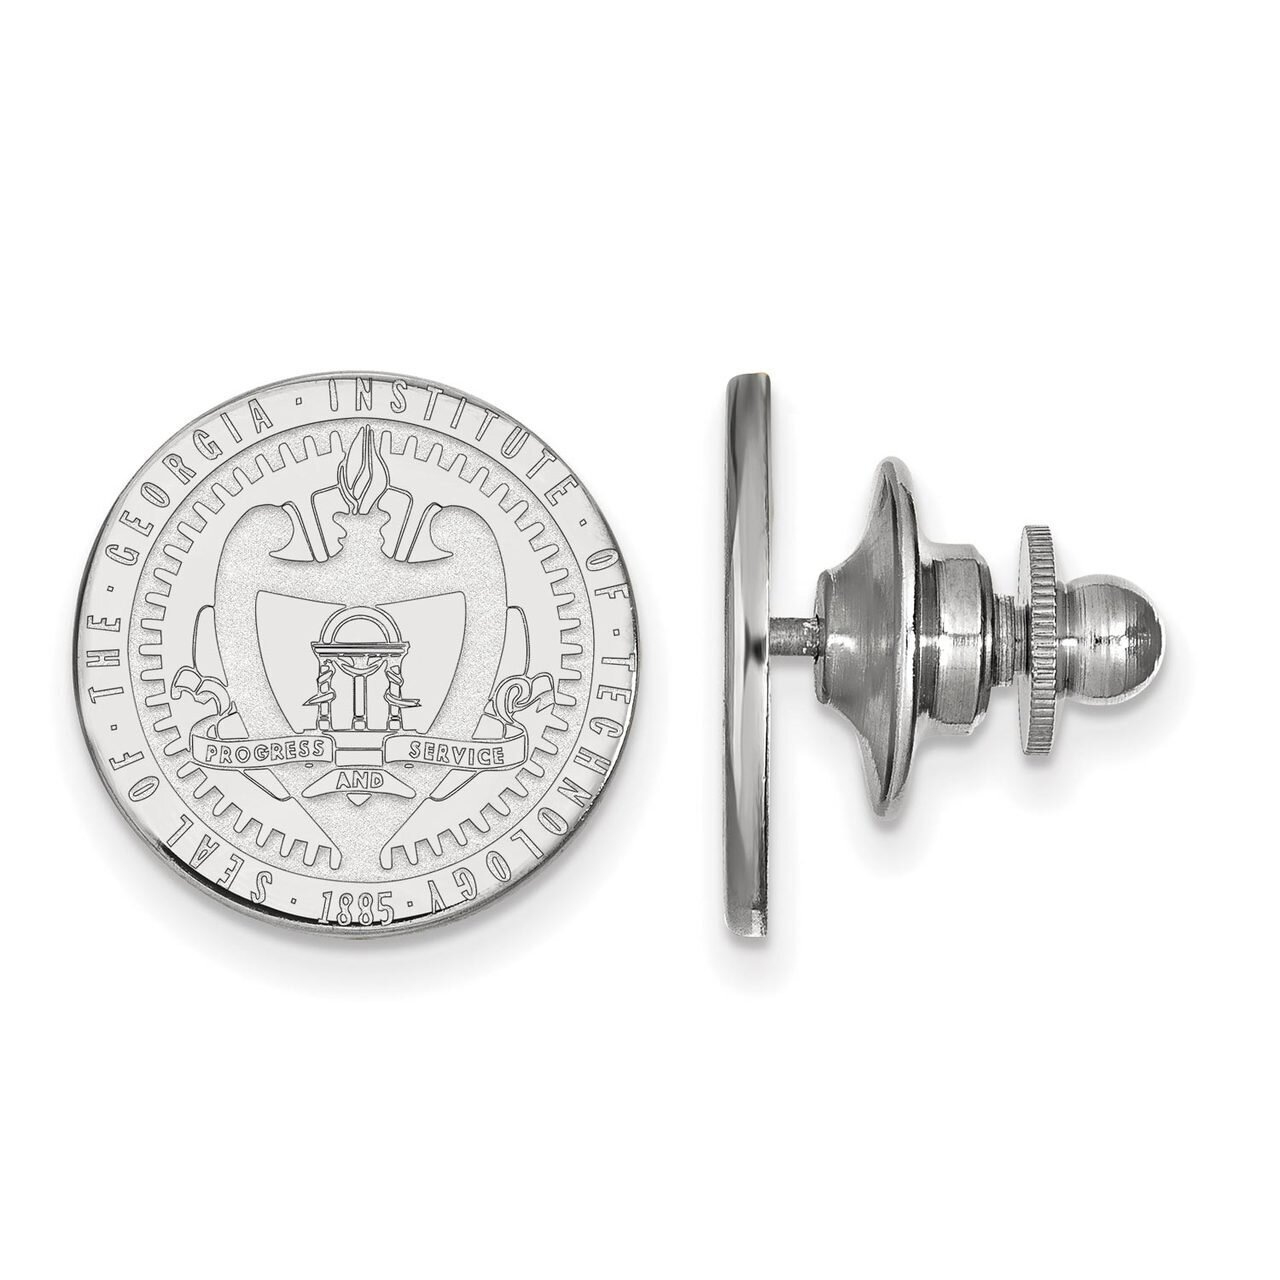 Georgia Institute of Technology Crest Lapel Pin Sterling Silver SS057GT